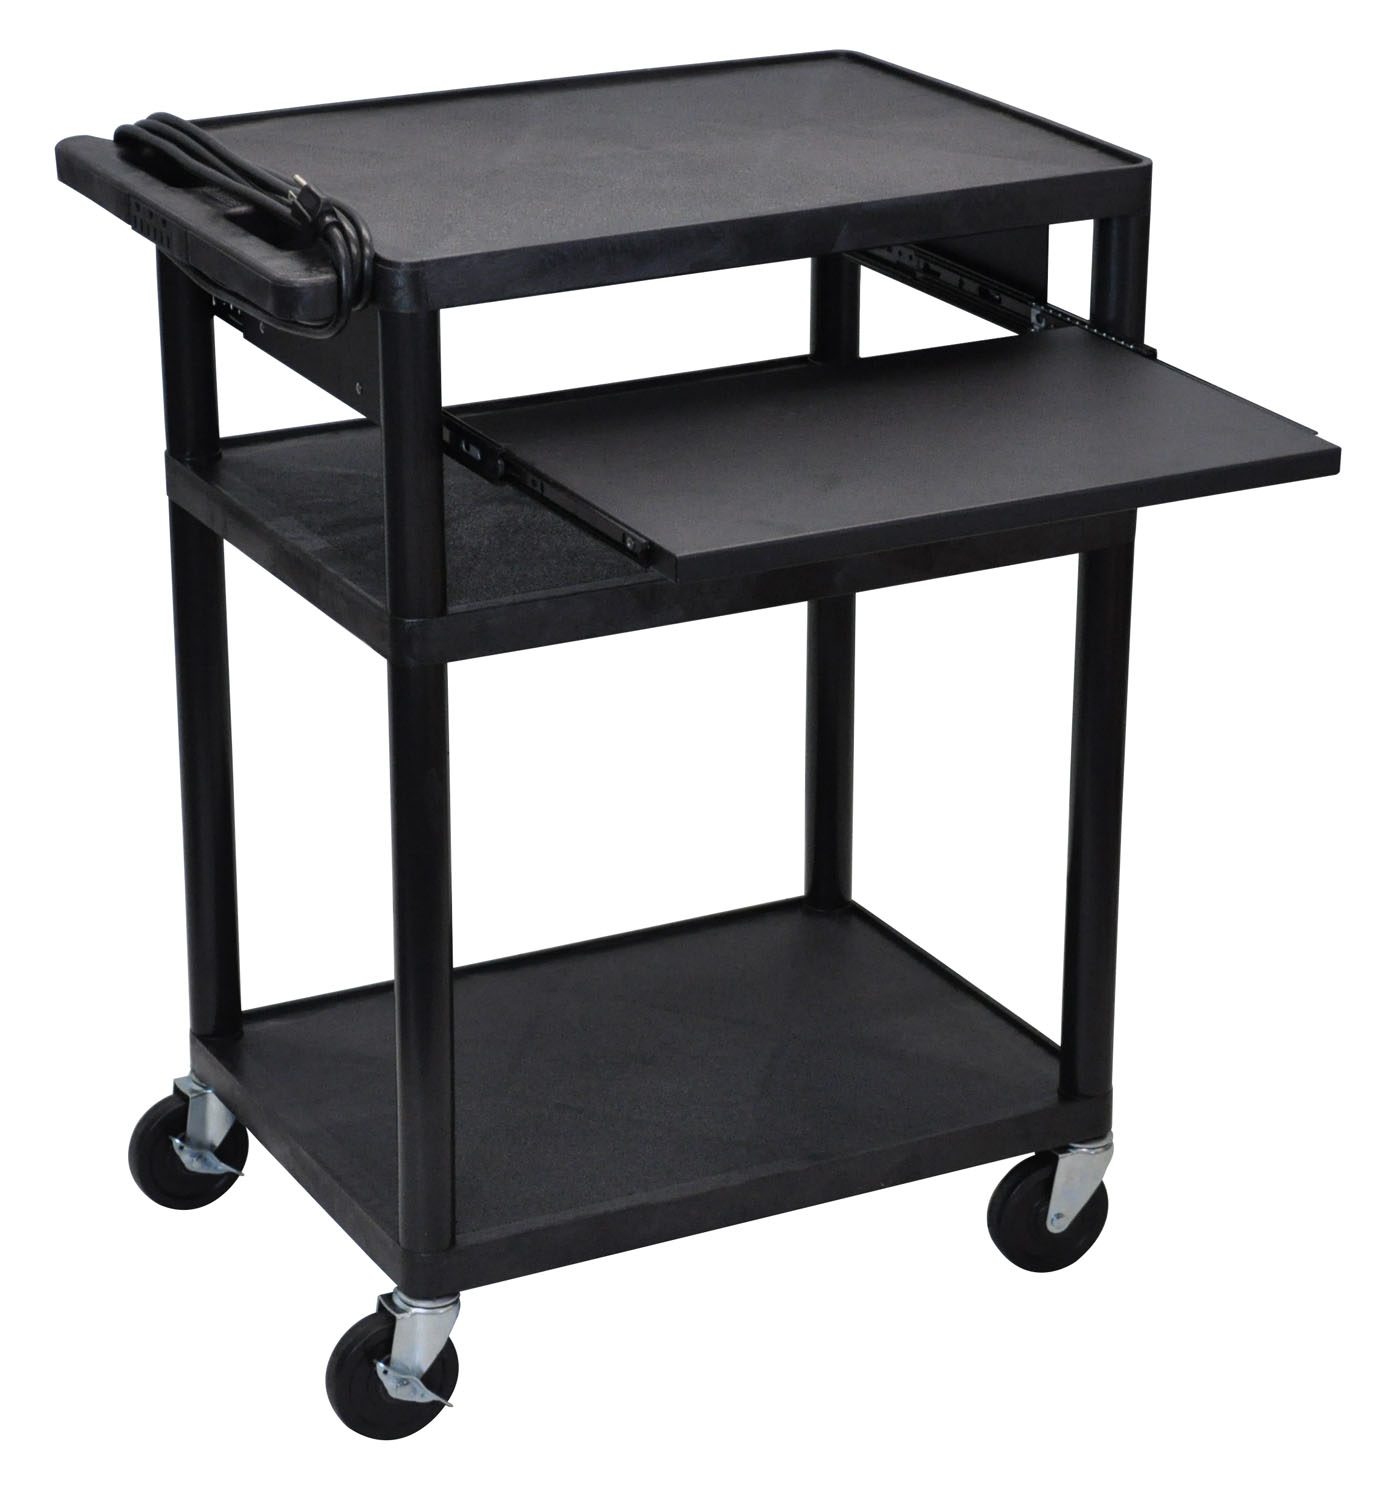 Luxor Lp34le-b 3 Shelves Multipurpose A/v Cart With Front Pullout Tray - Black